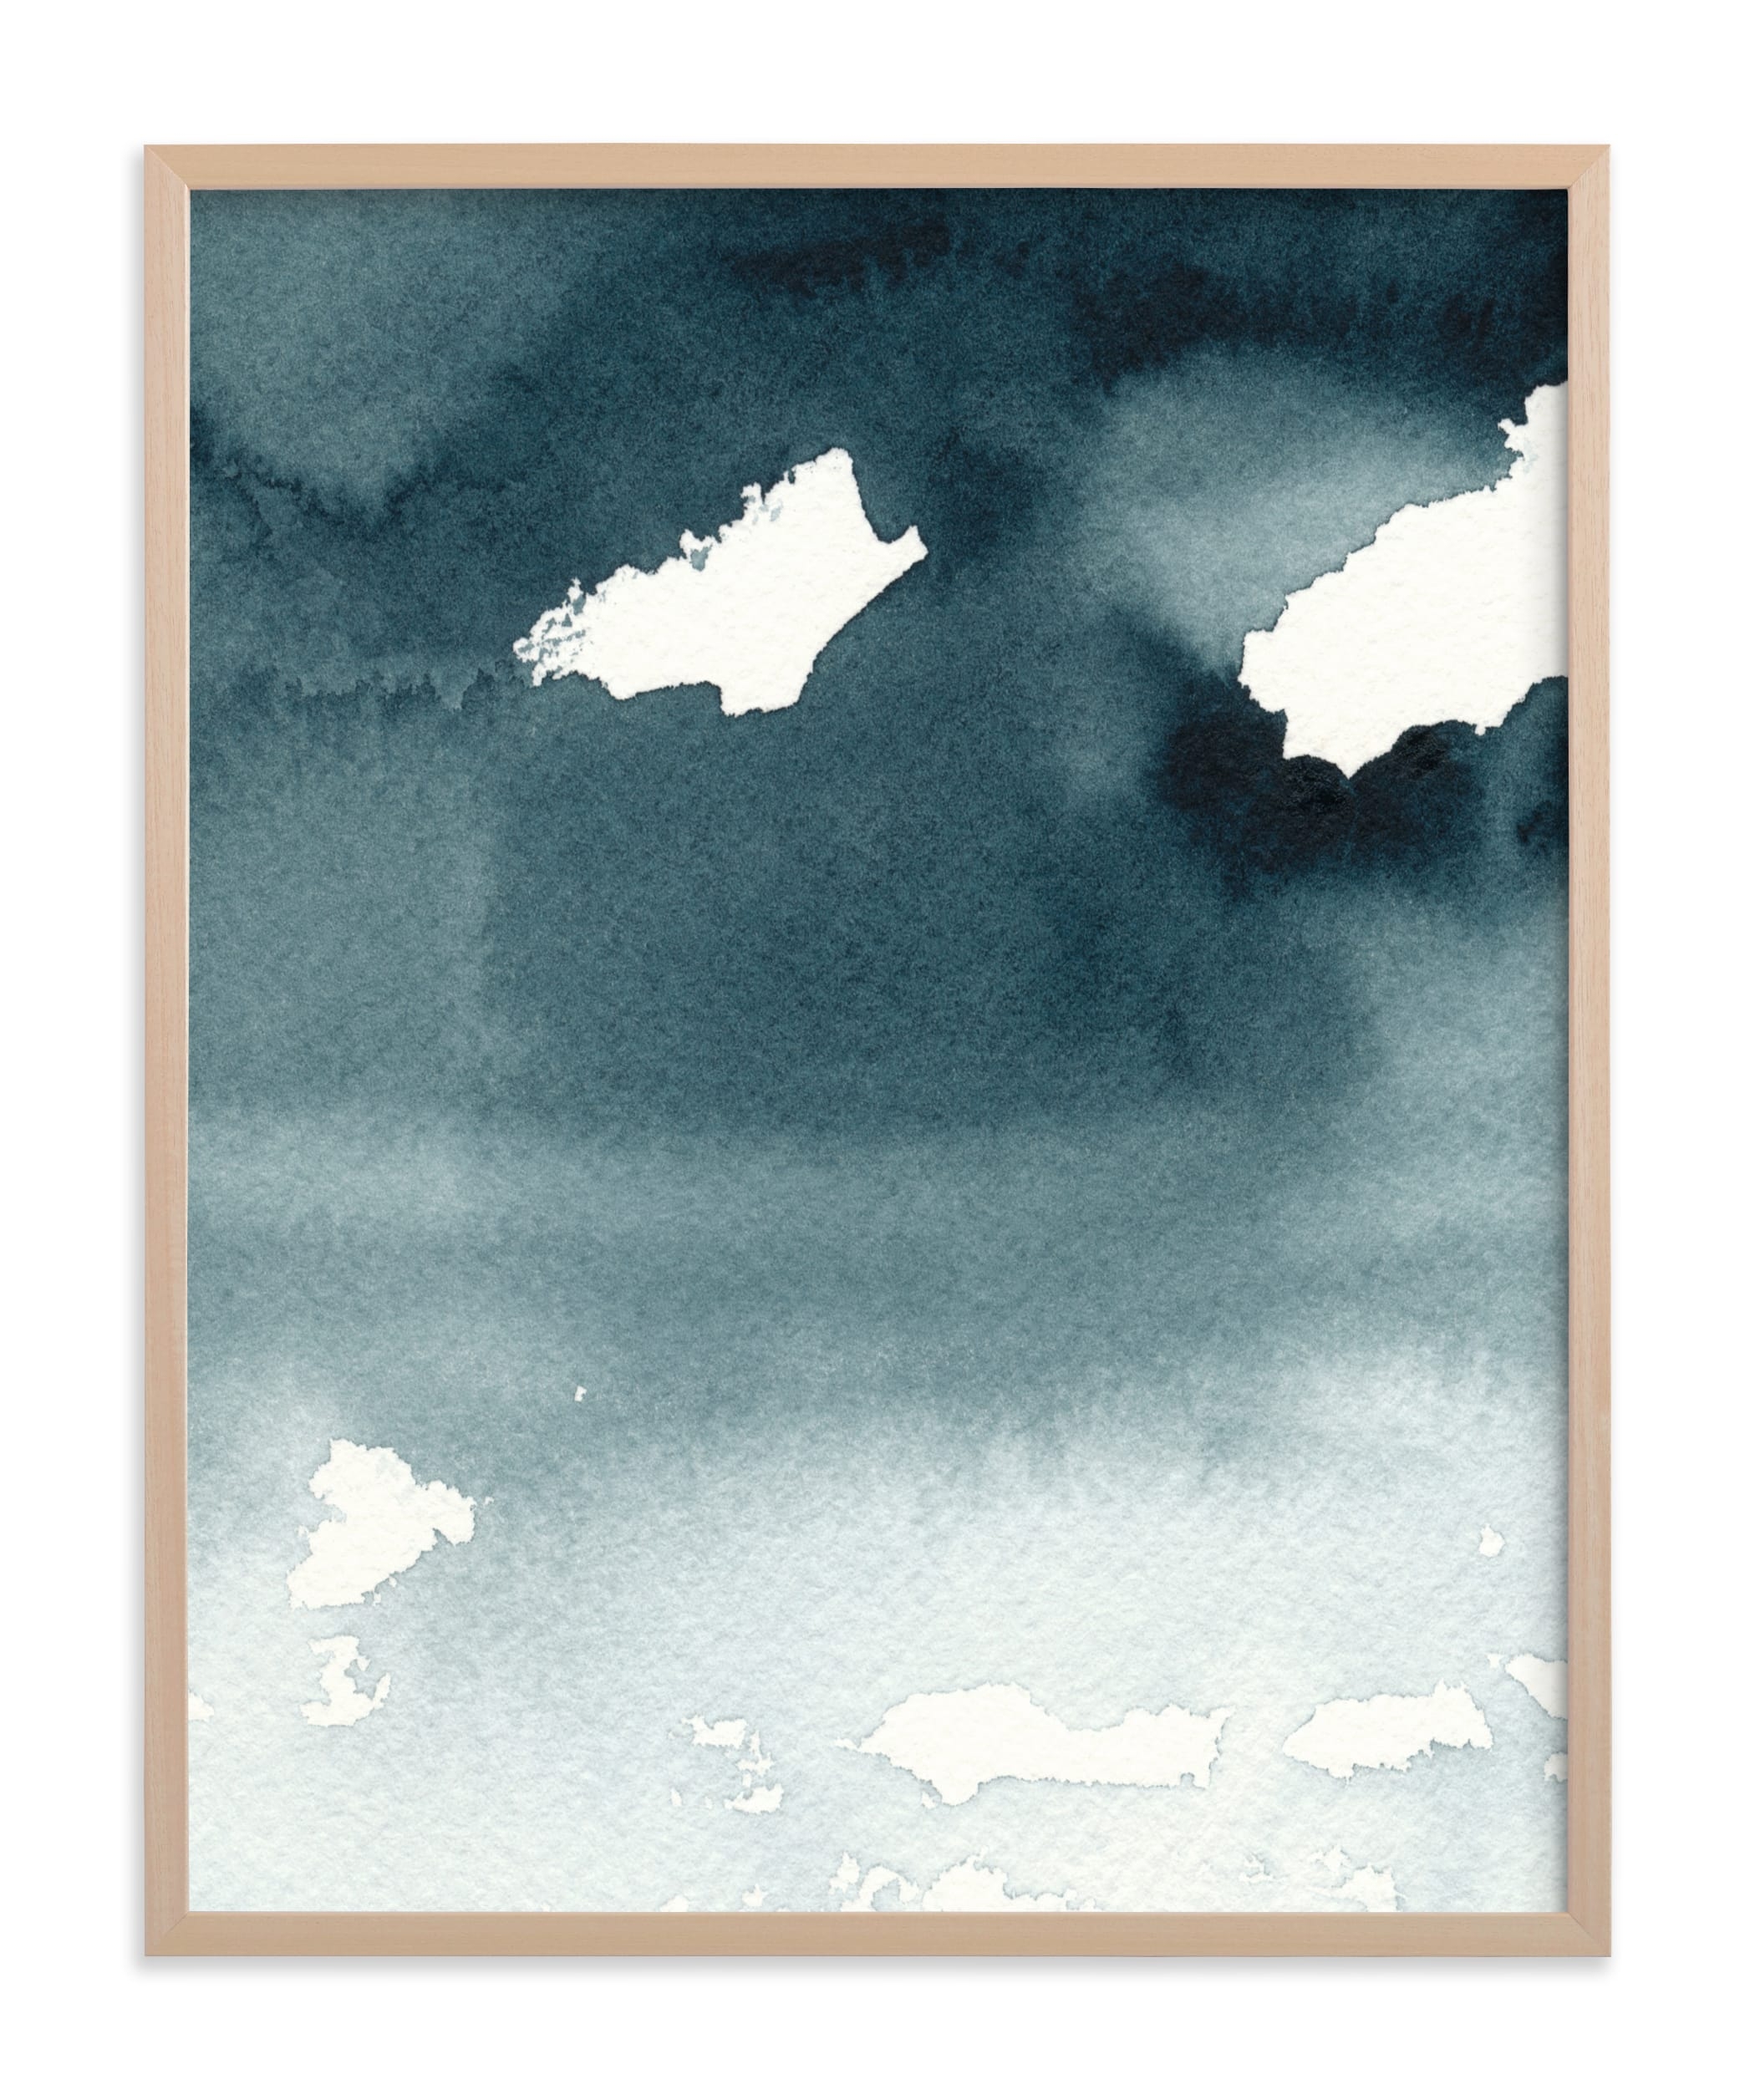 Mist Rises Over The Water Limited Edition Art Print - Image 0